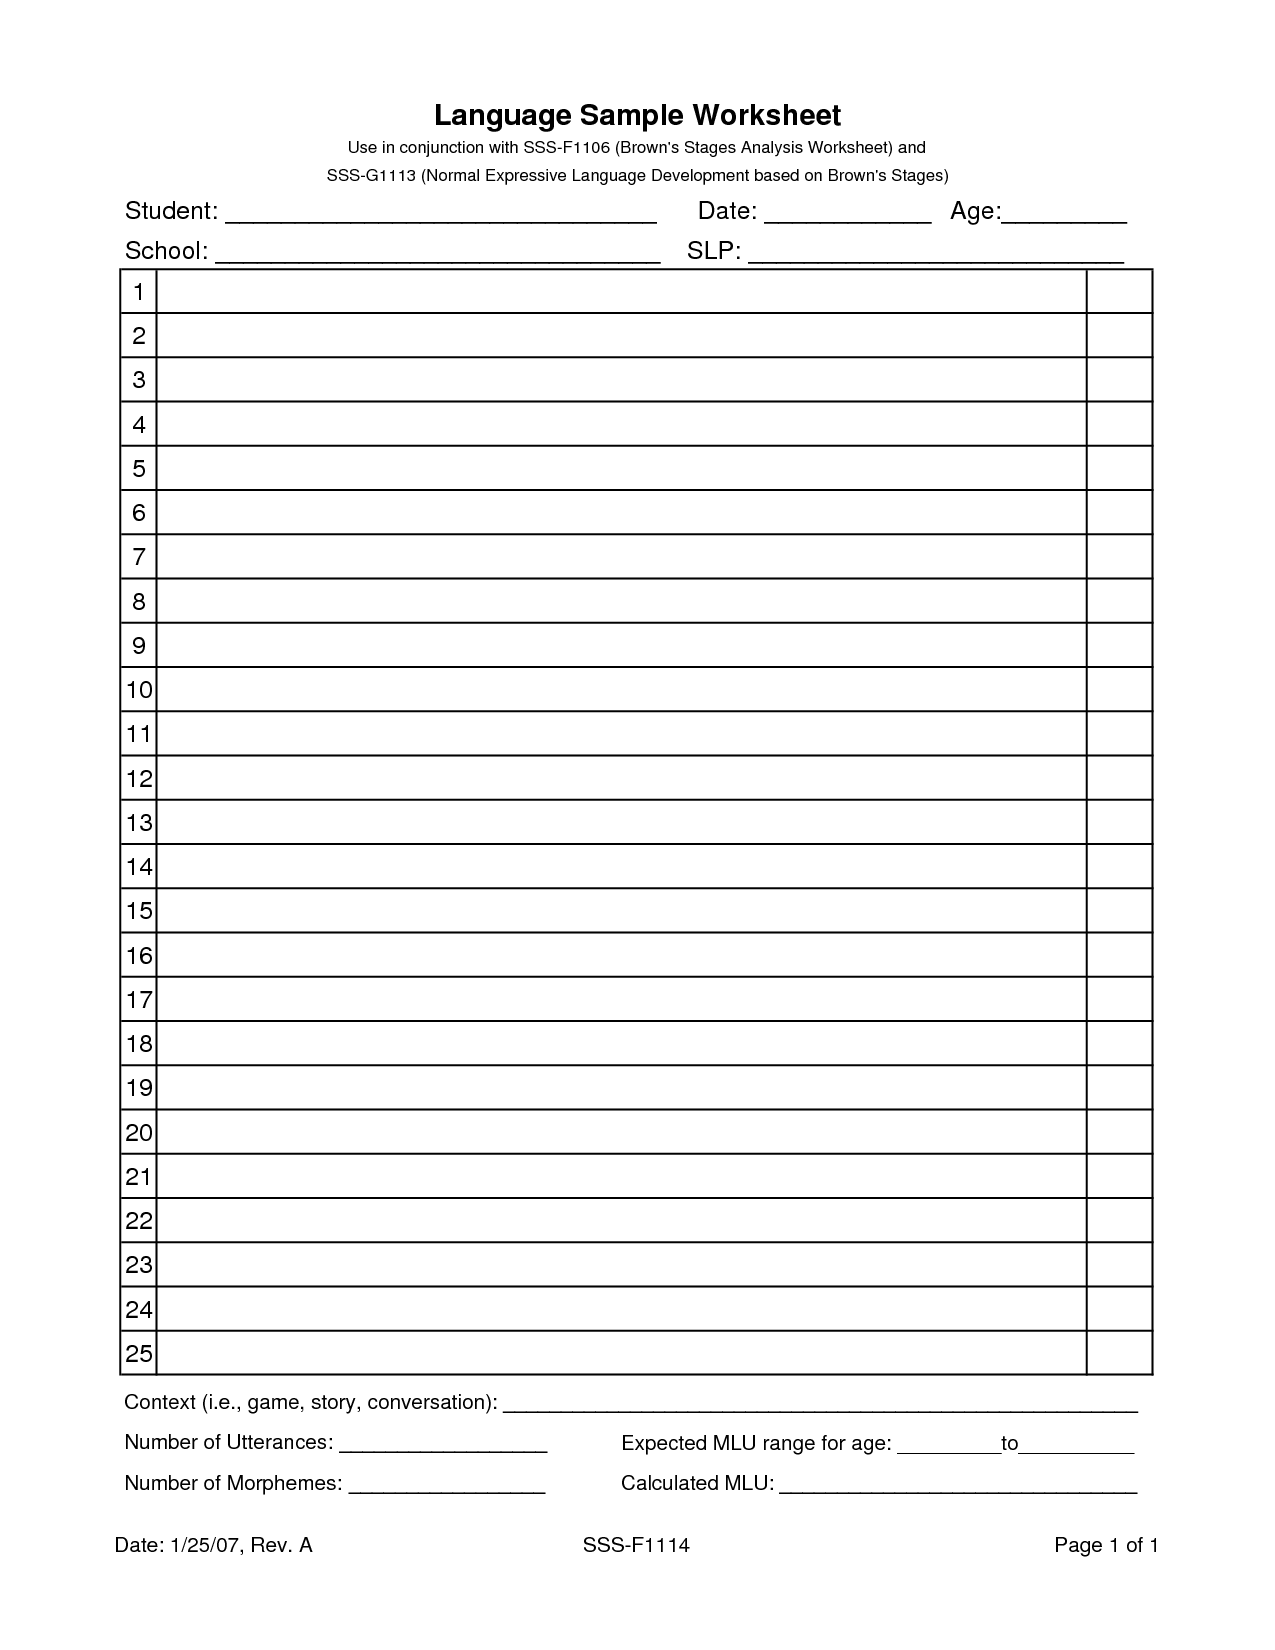 13-best-images-of-reading-large-numbers-worksheet-read-large-numbers-worksheet-reading-large